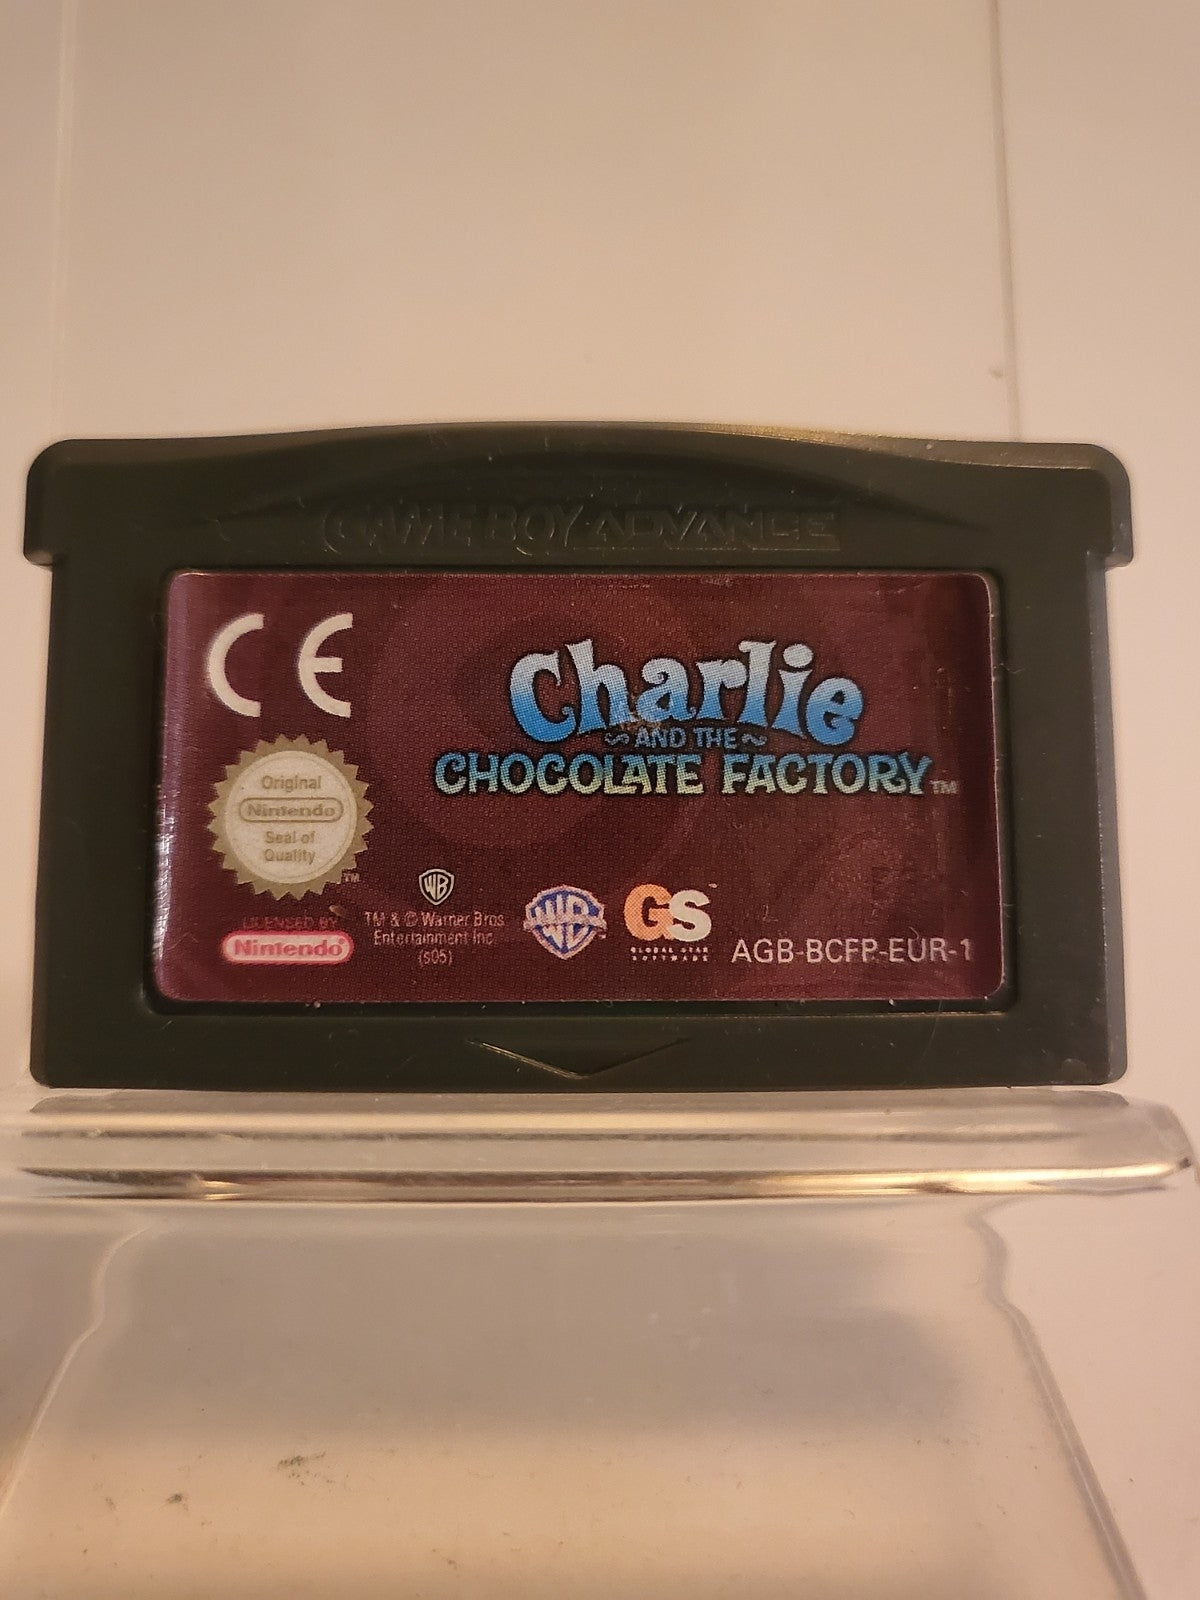 Charlie and the Chocolate Factory Gameboy Advance